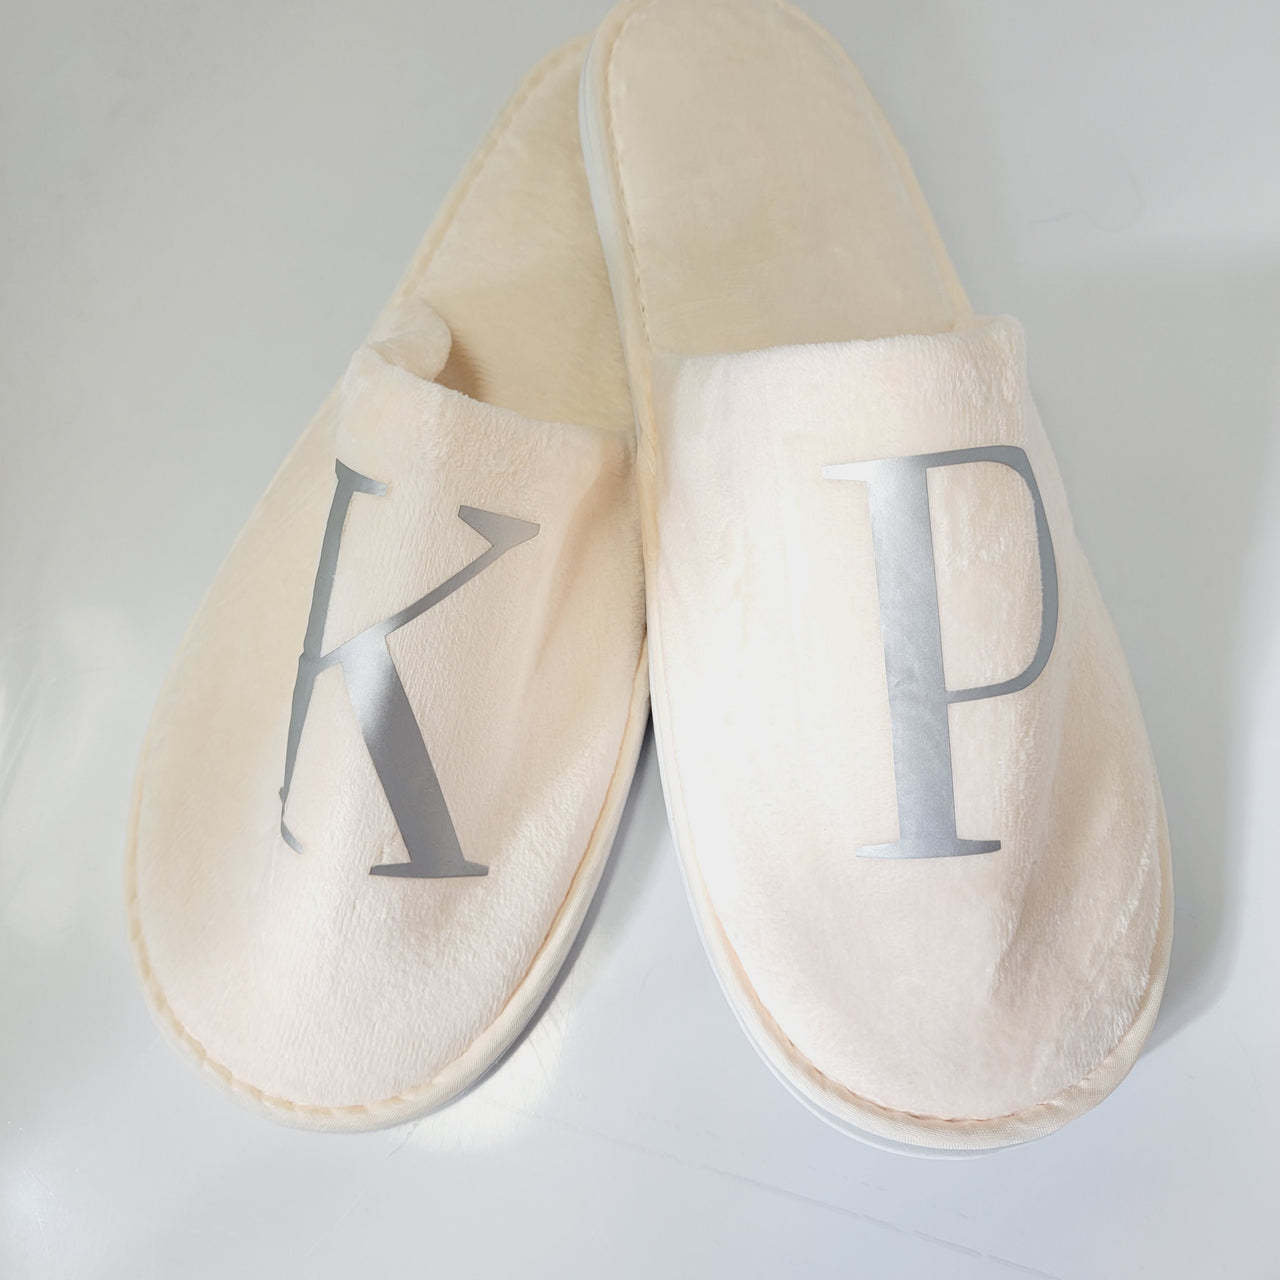 Large Letter Slippers - 3 Colors - SewingSeams